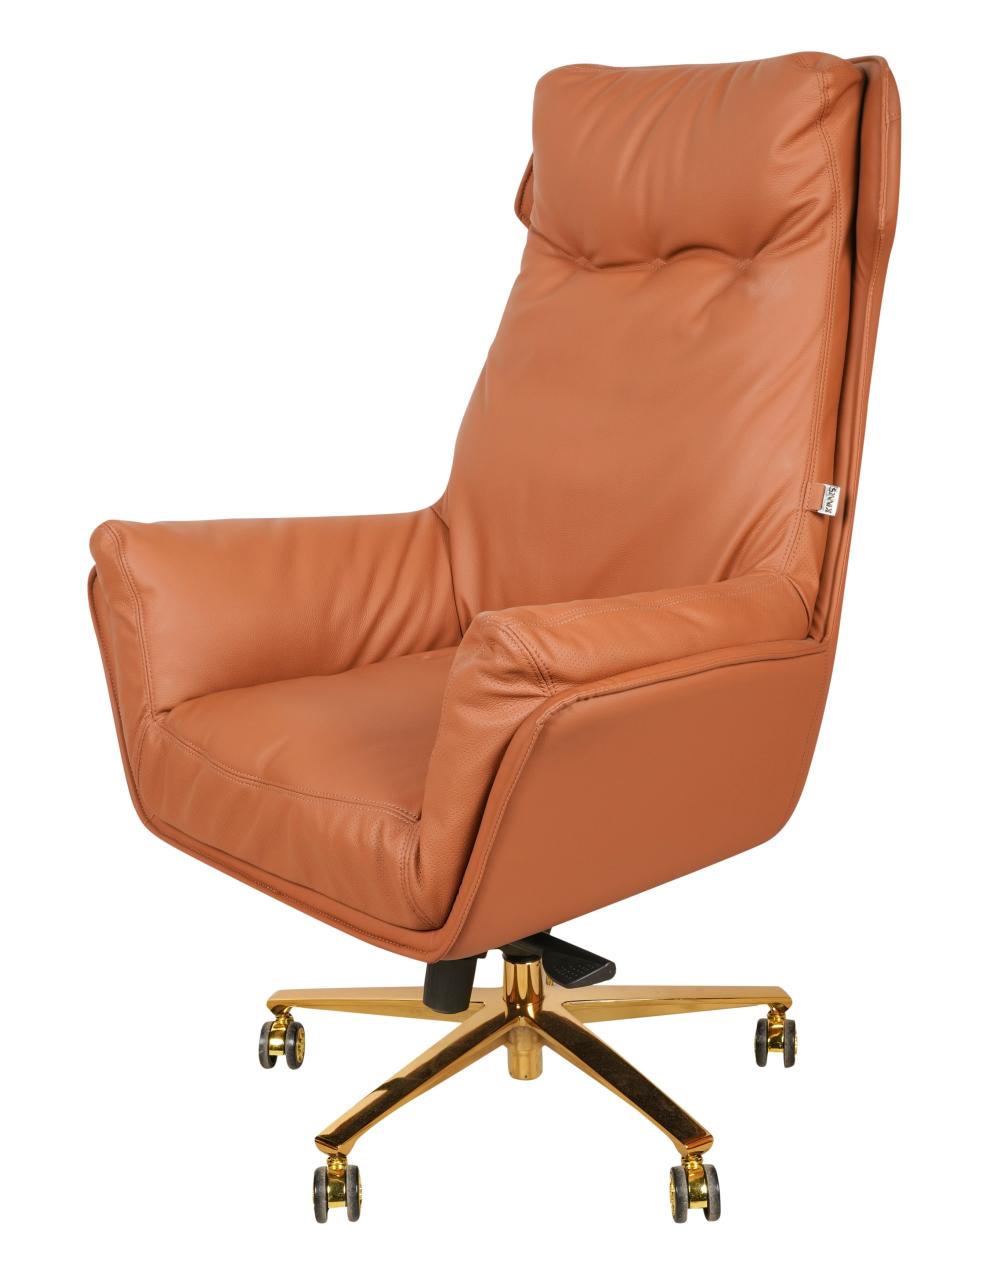 BROWN LEATHER SWIVEL OFFICE CHAIRBrown